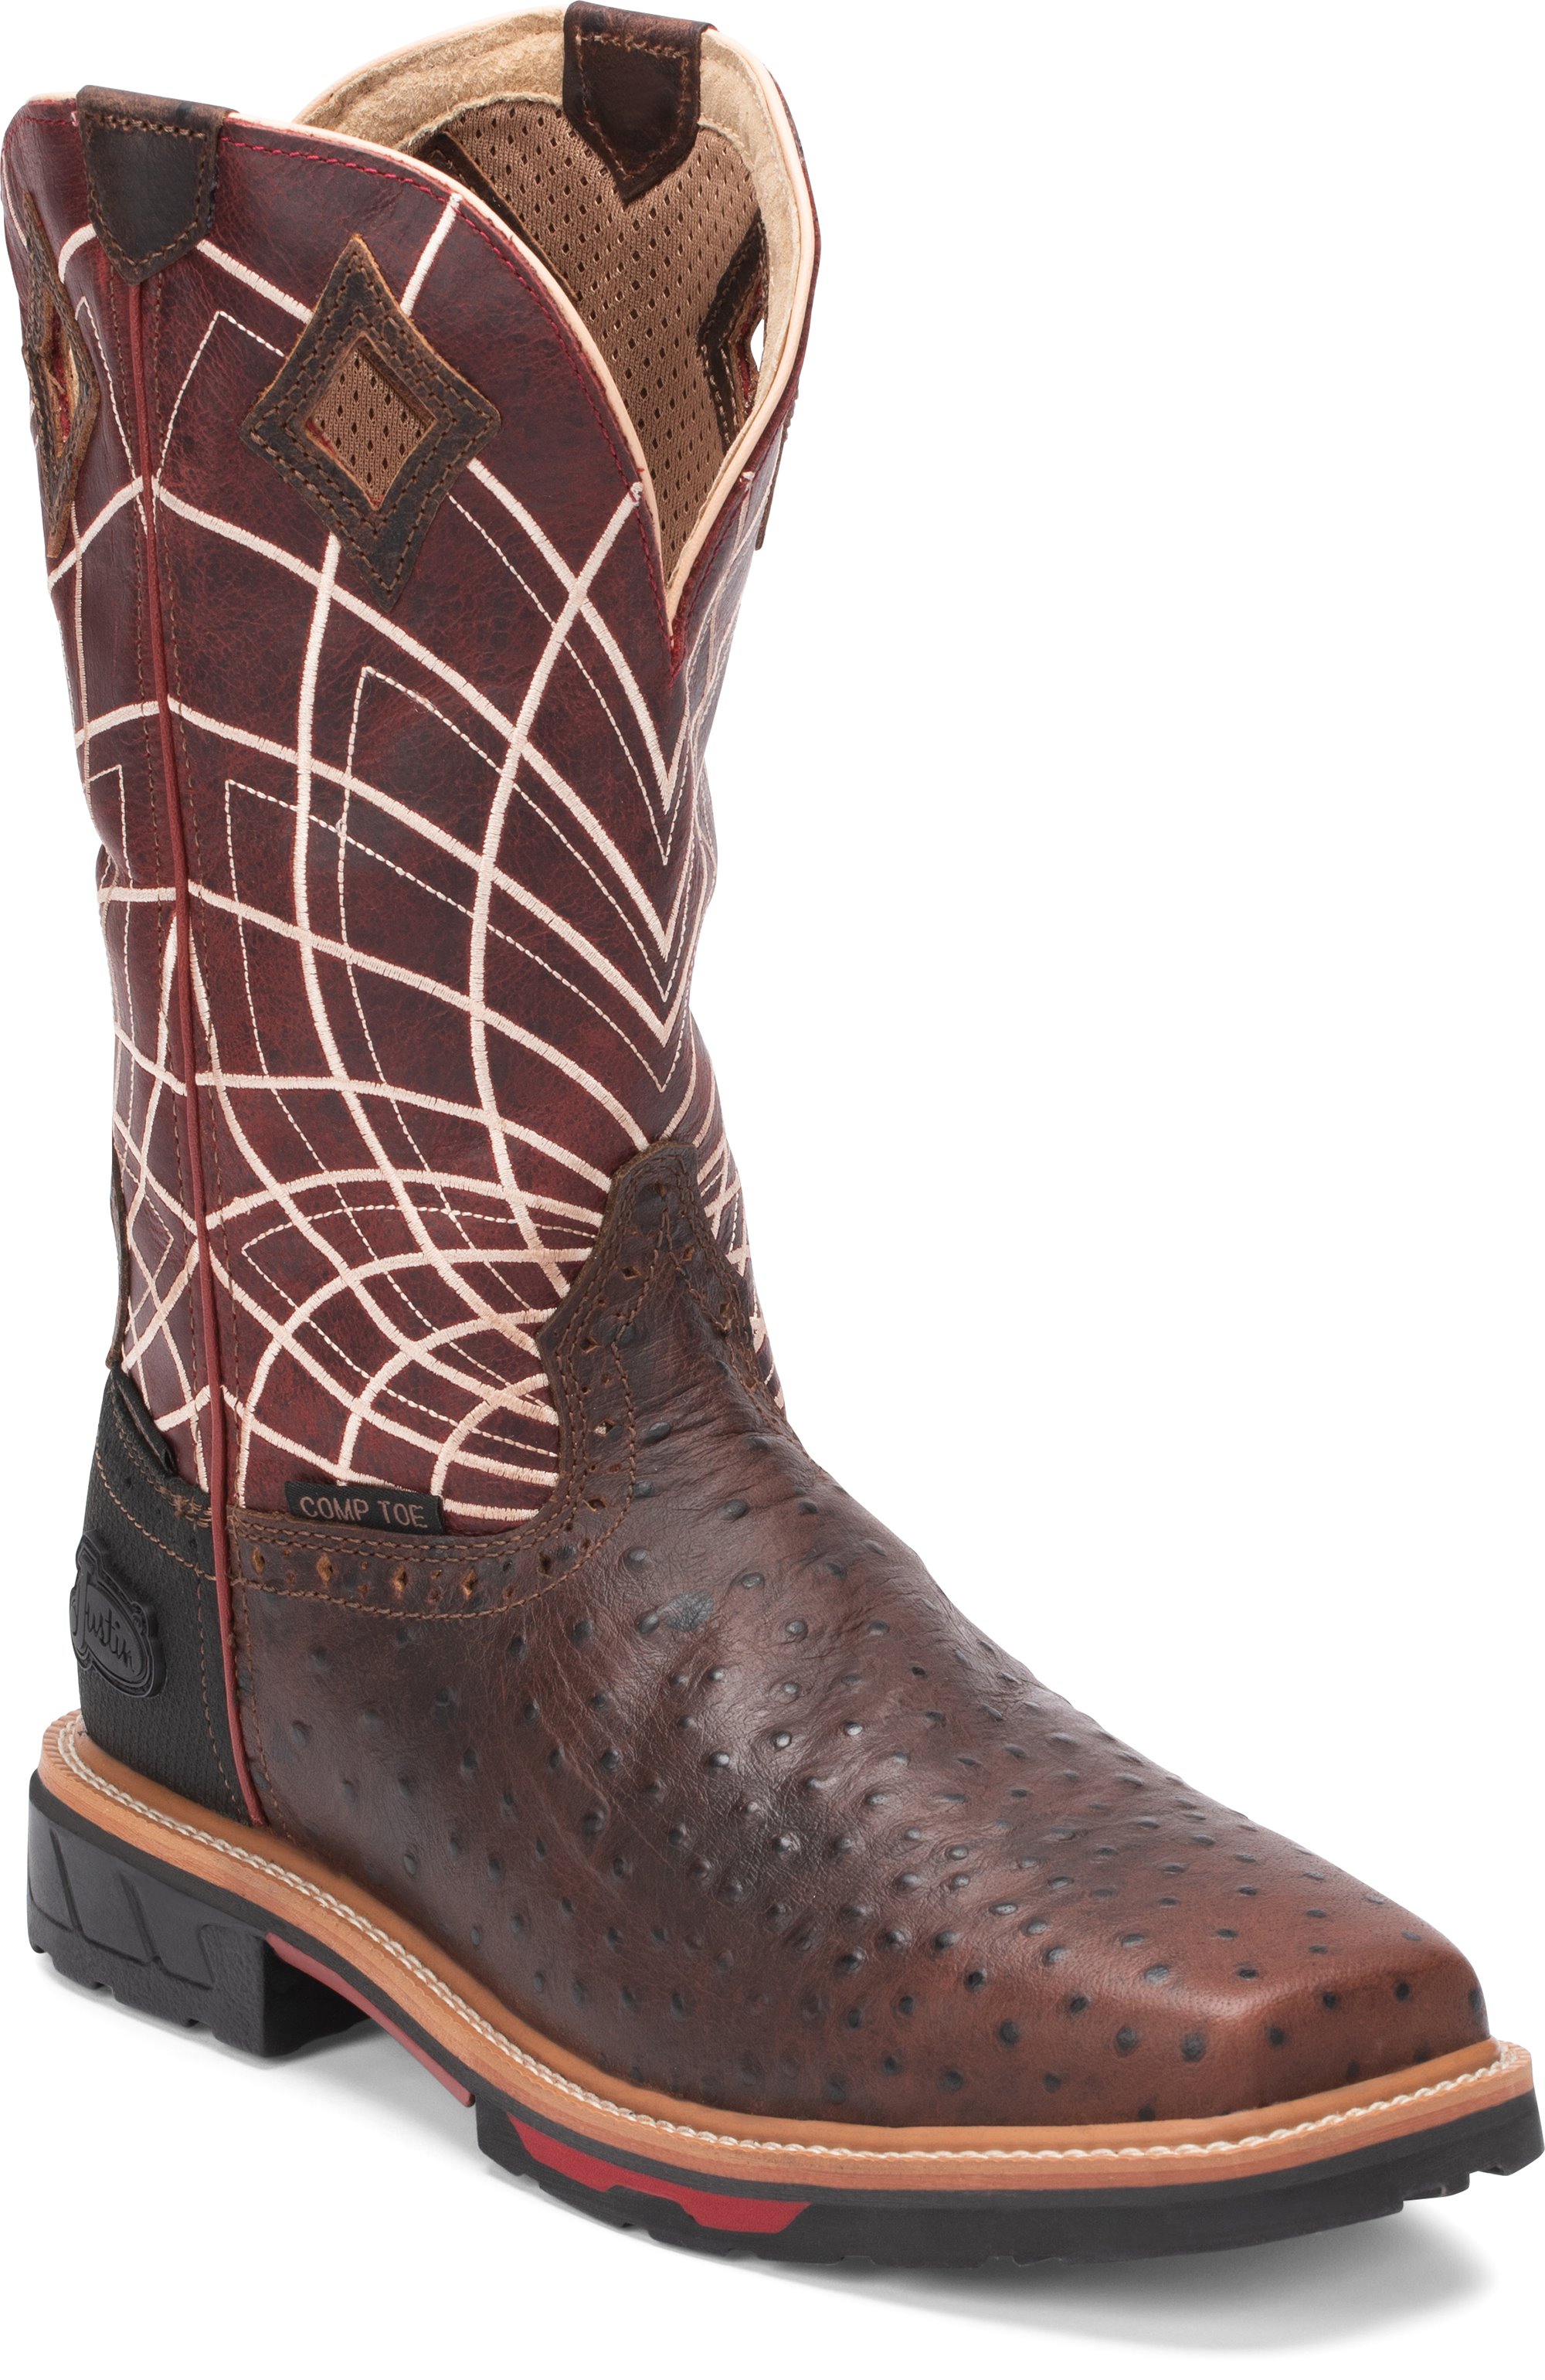 composite toe justin boots